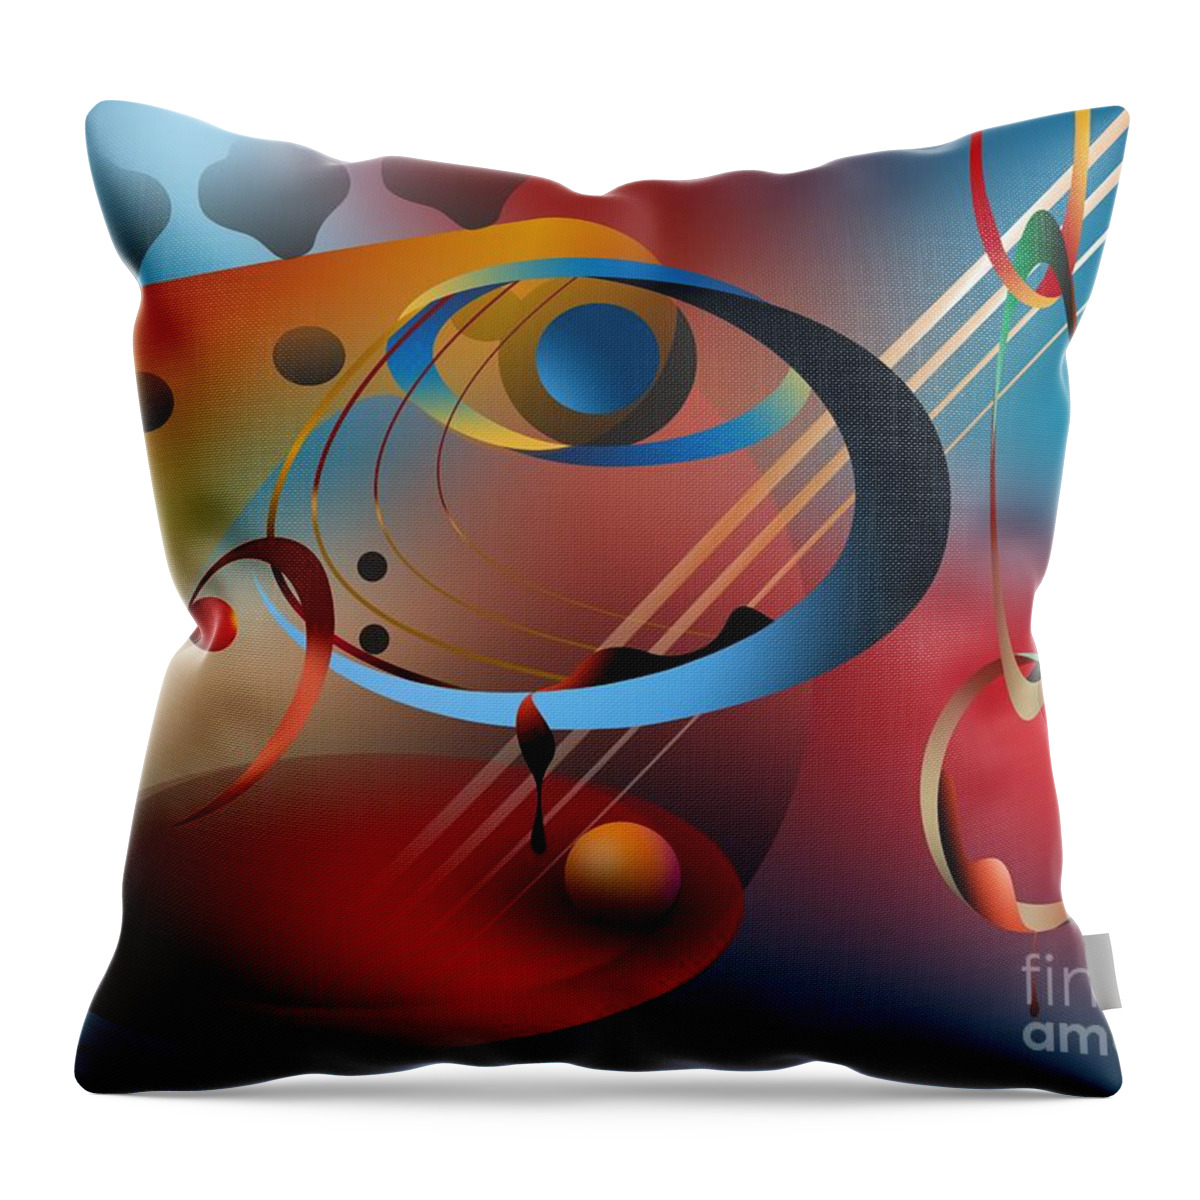 Sound Throw Pillow featuring the digital art Sound Of Bass Guitar by Leo Symon